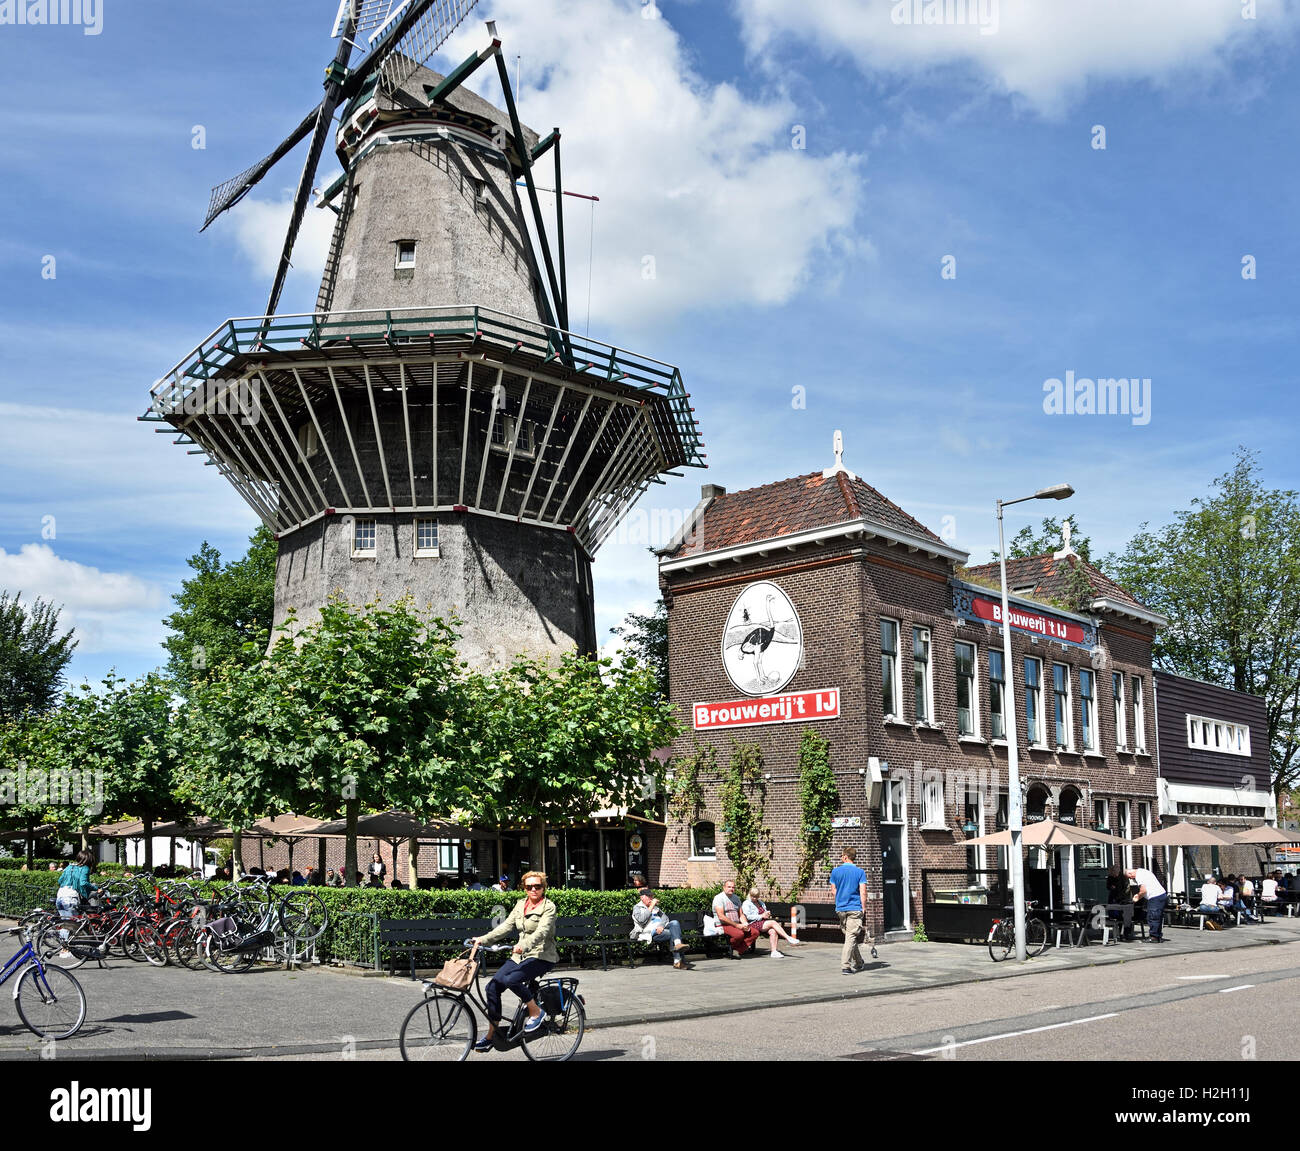 Brouwerij ‘t IJ bar pub which serves dutch beer brewed on-site, original brewery Amsterdam The Netherlands. Windmill Stock Photo